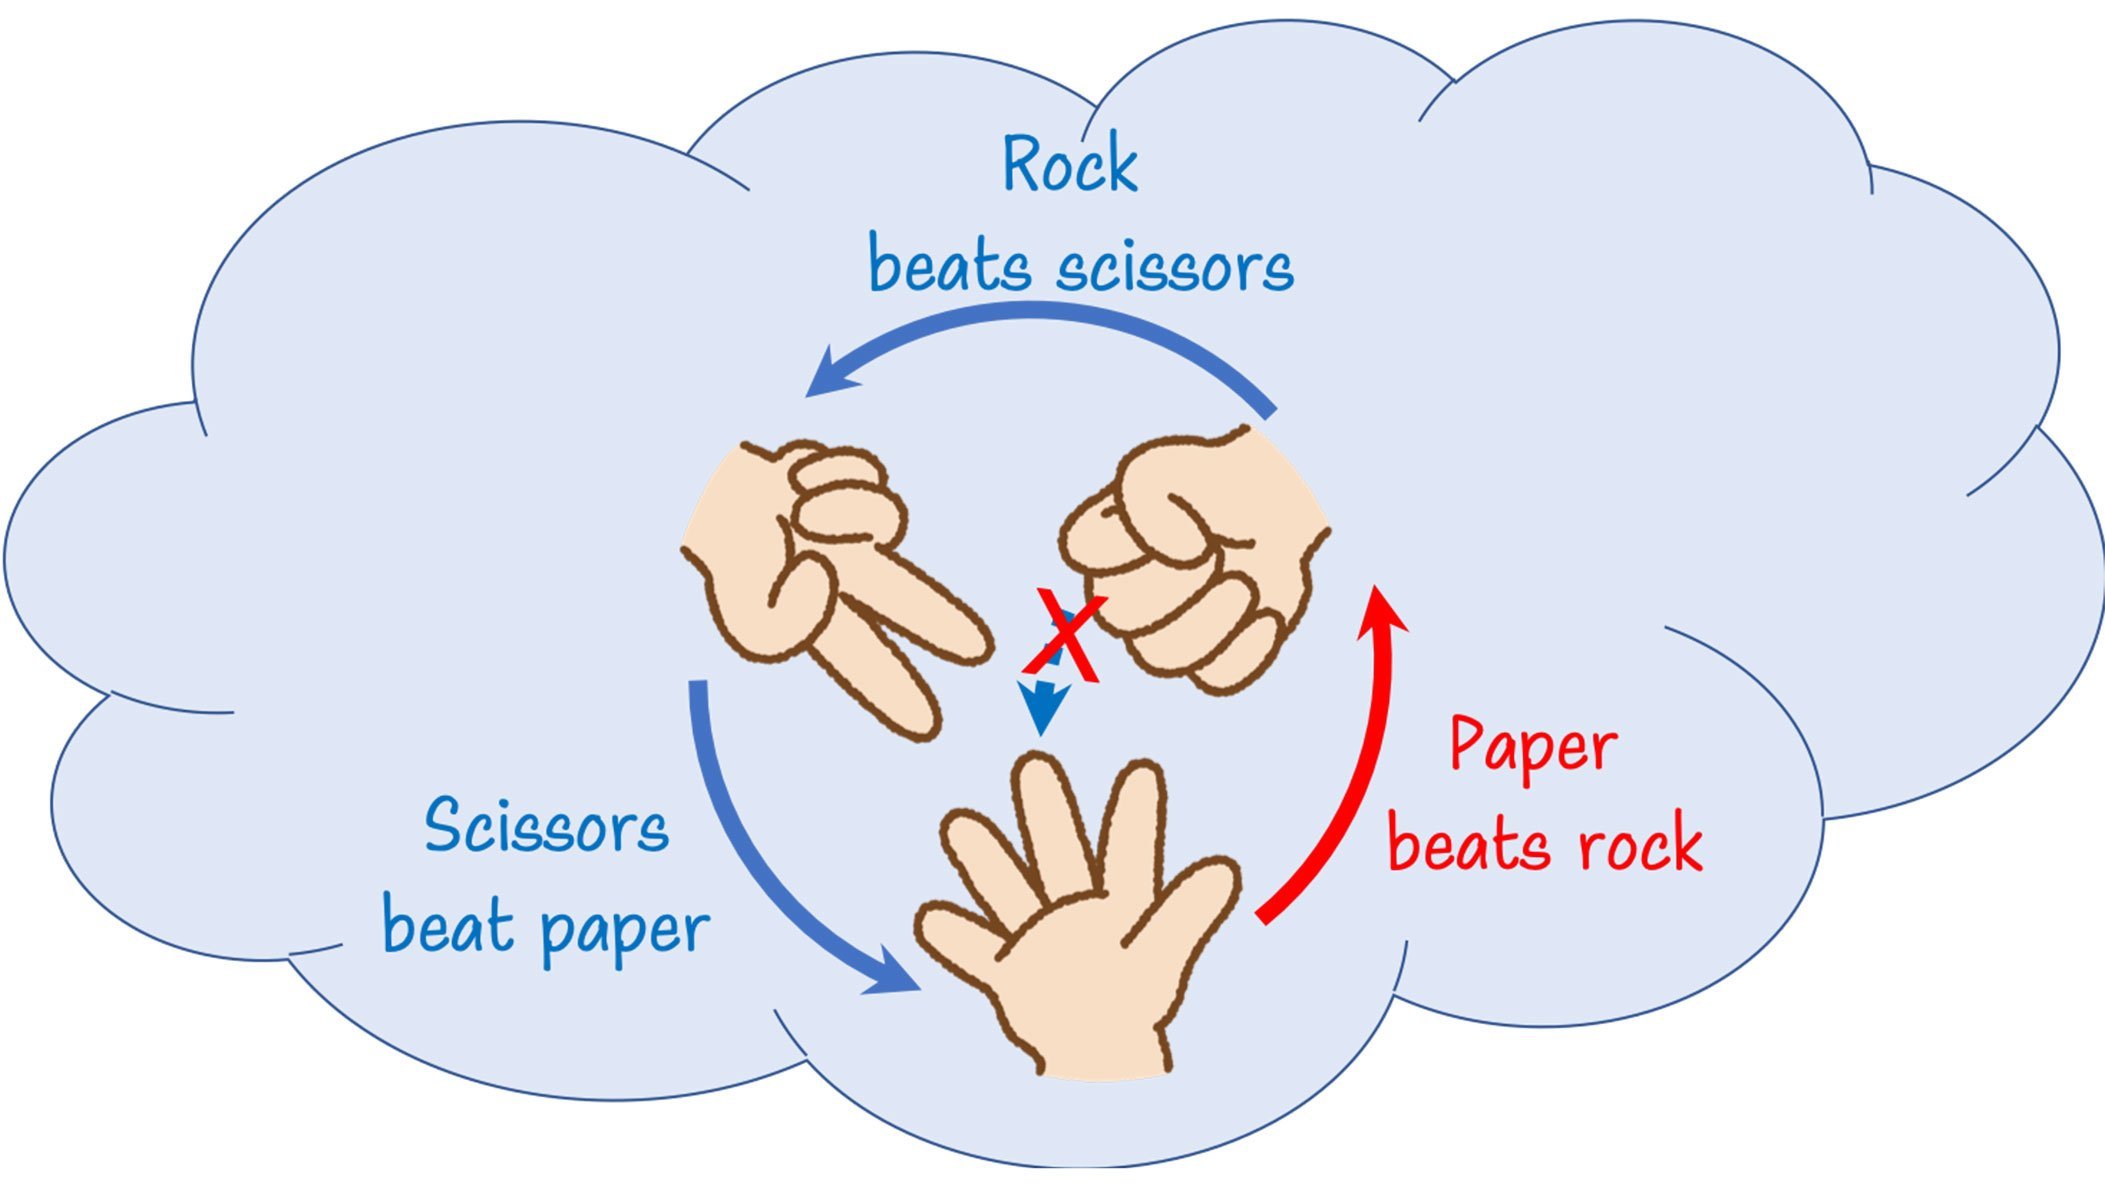 The Hardy nonlocality can be interpreted as a rock-paper-scissors game: while rock beats scissors and scissors beat paper, it is impossible for the rock to beat the paper; instead, the paper beats the rock, which causes a paradox, i.e., nonlocality. ©Tohoku University